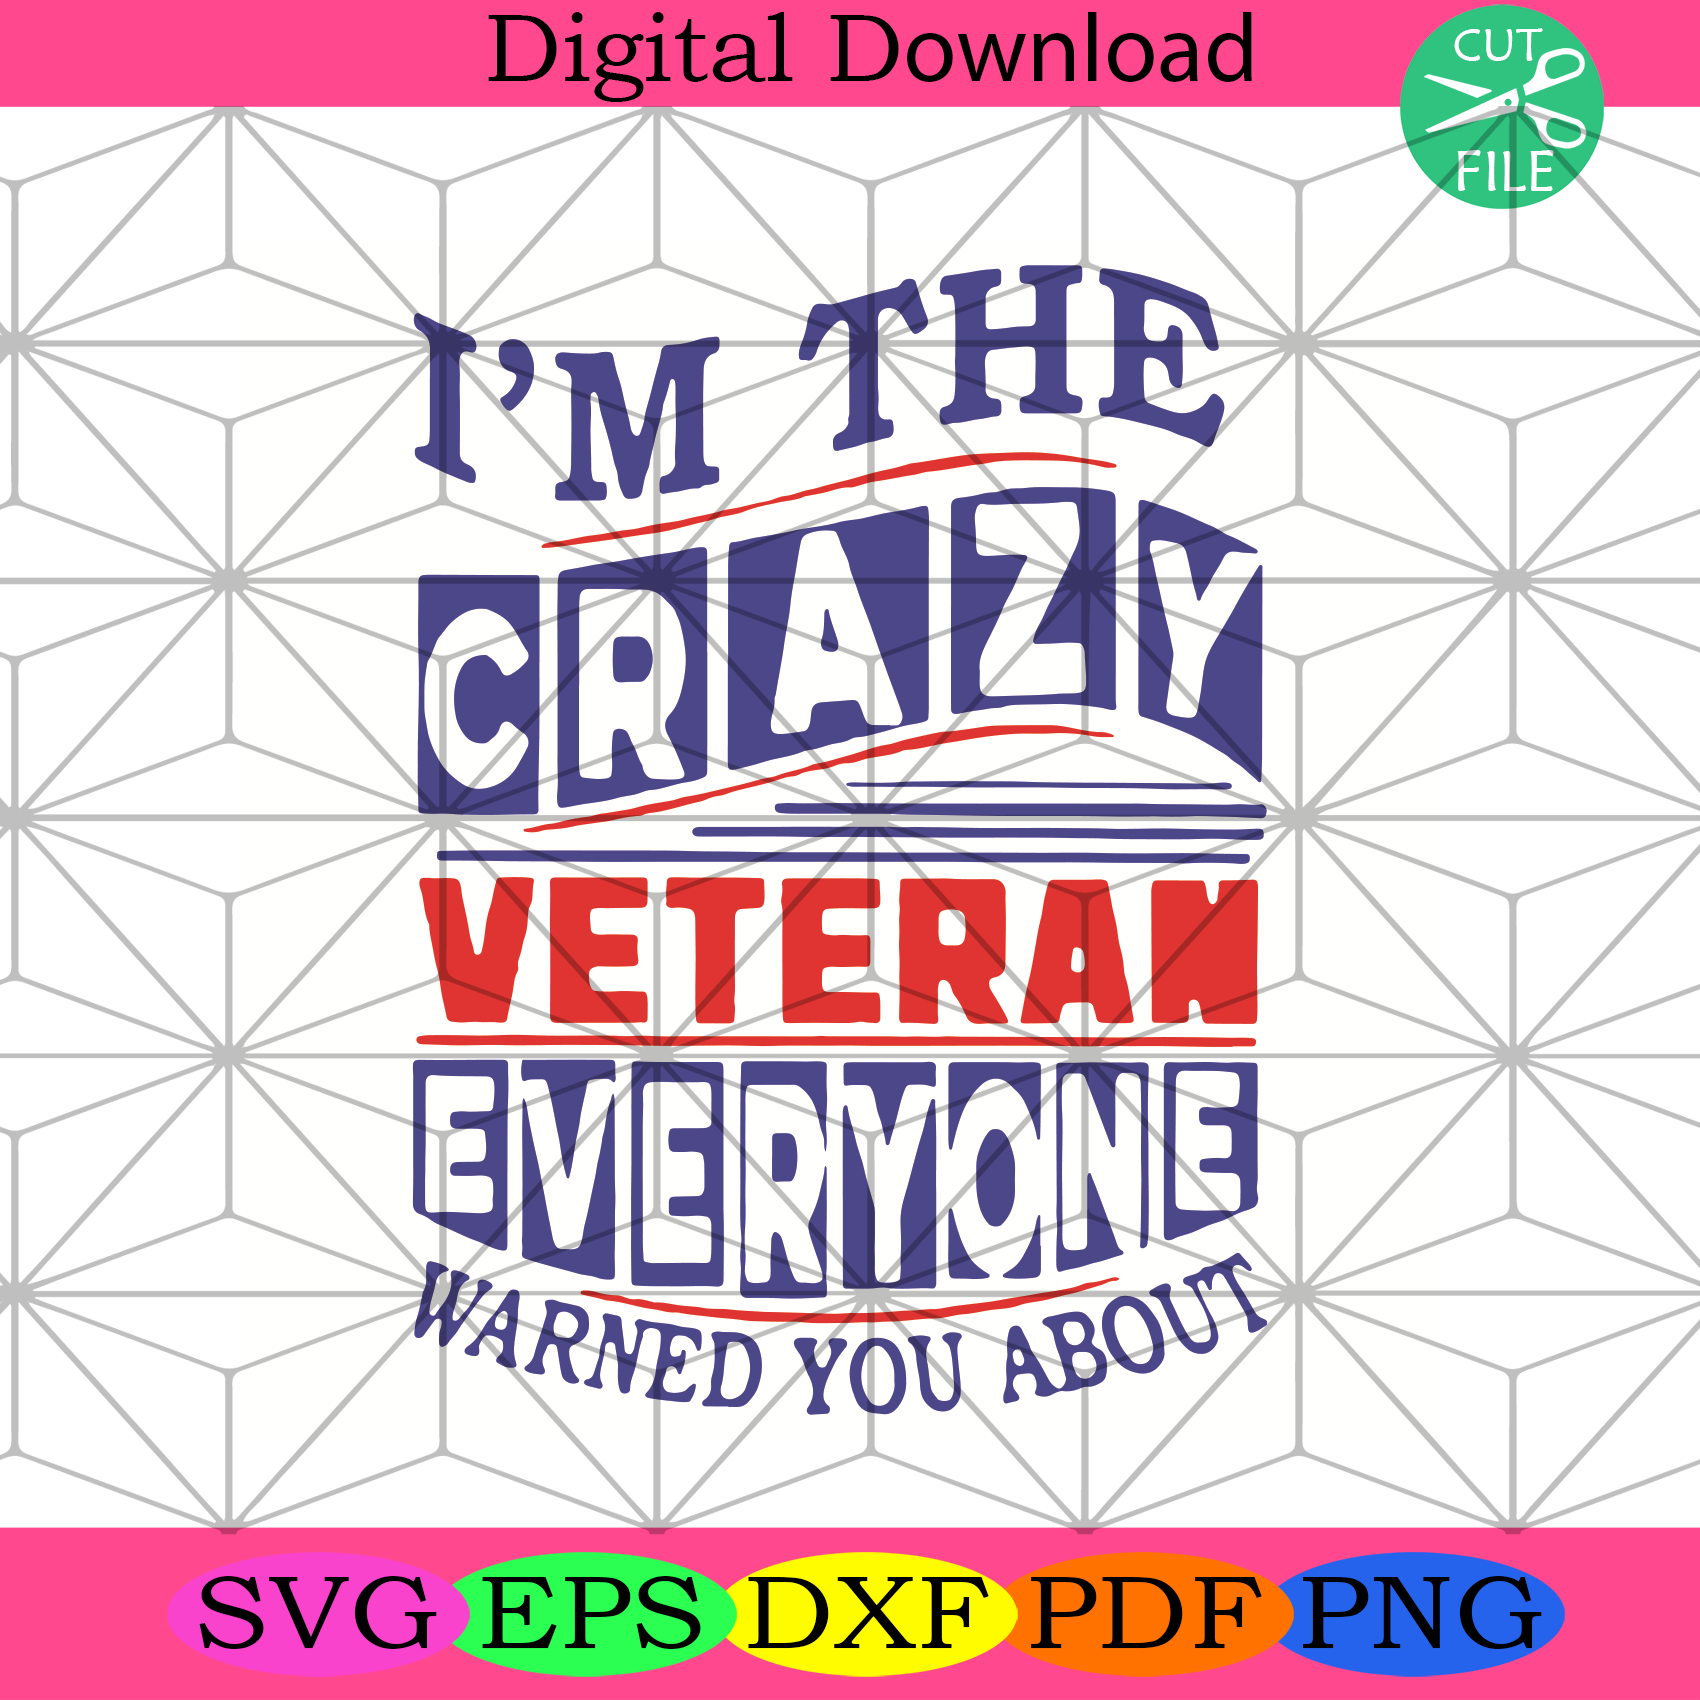 I Am The Crazy Veteran Everyone Warned You About Svg Trending Svg